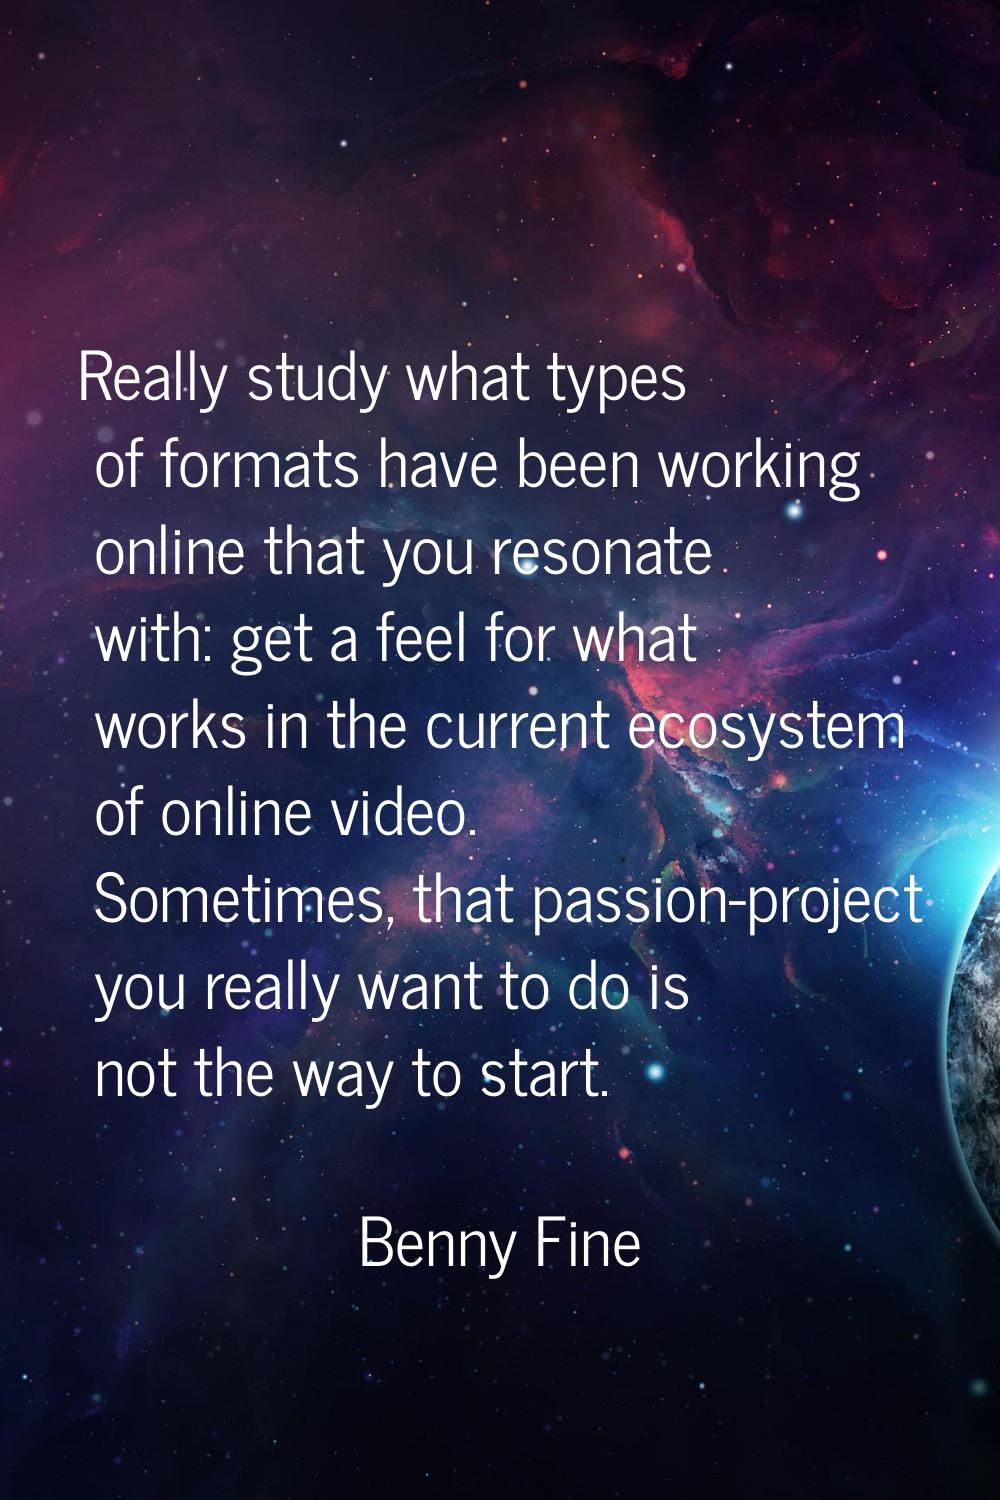 Really study what types of formats have been working online that you resonate with: get a feel for 